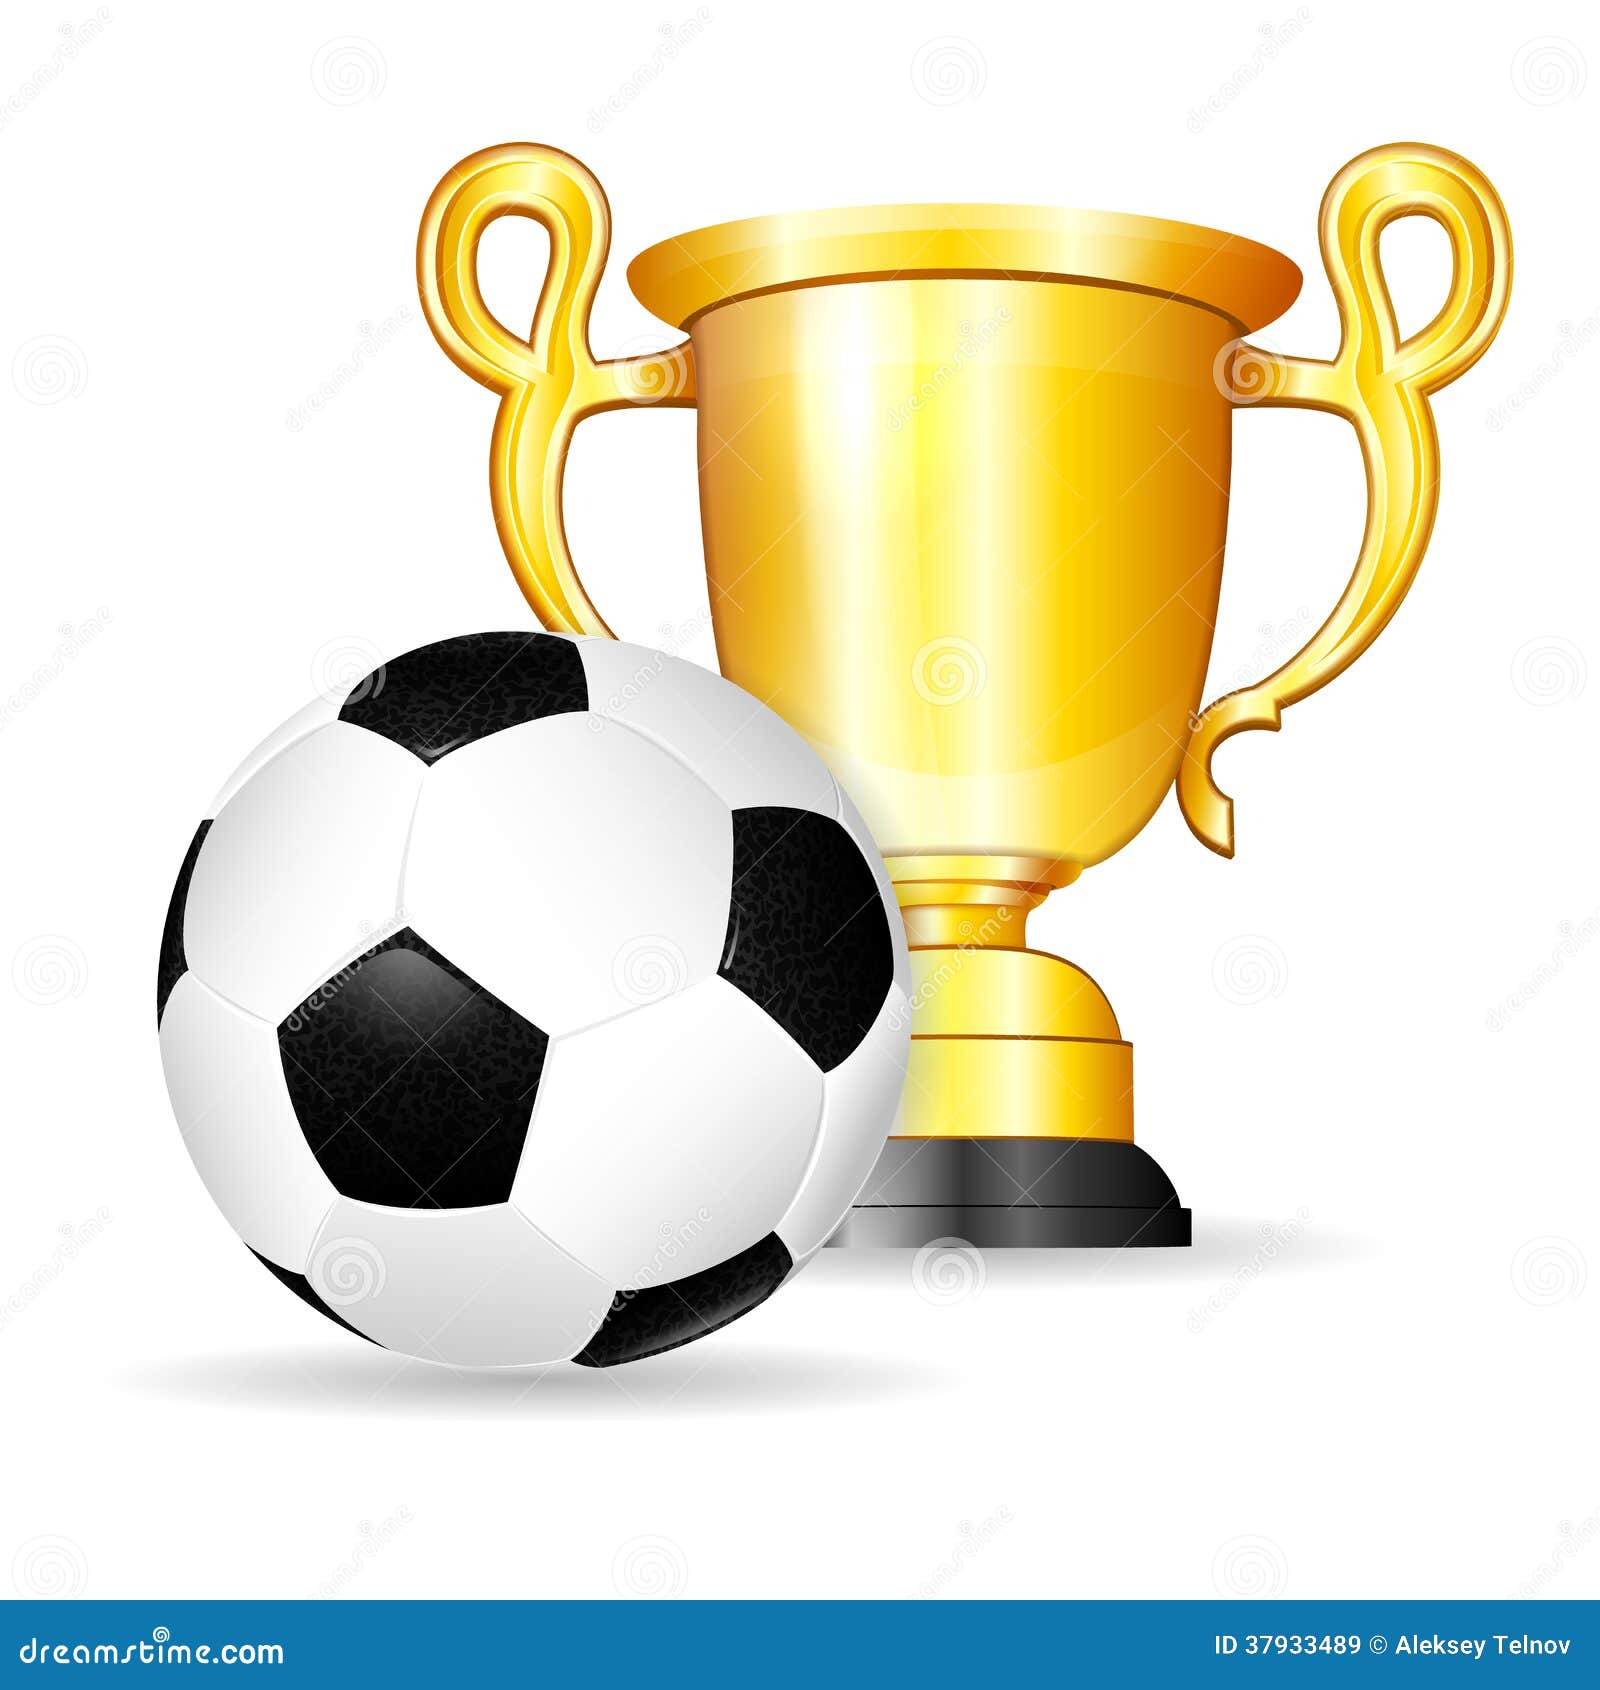 clipart football trophy - photo #34